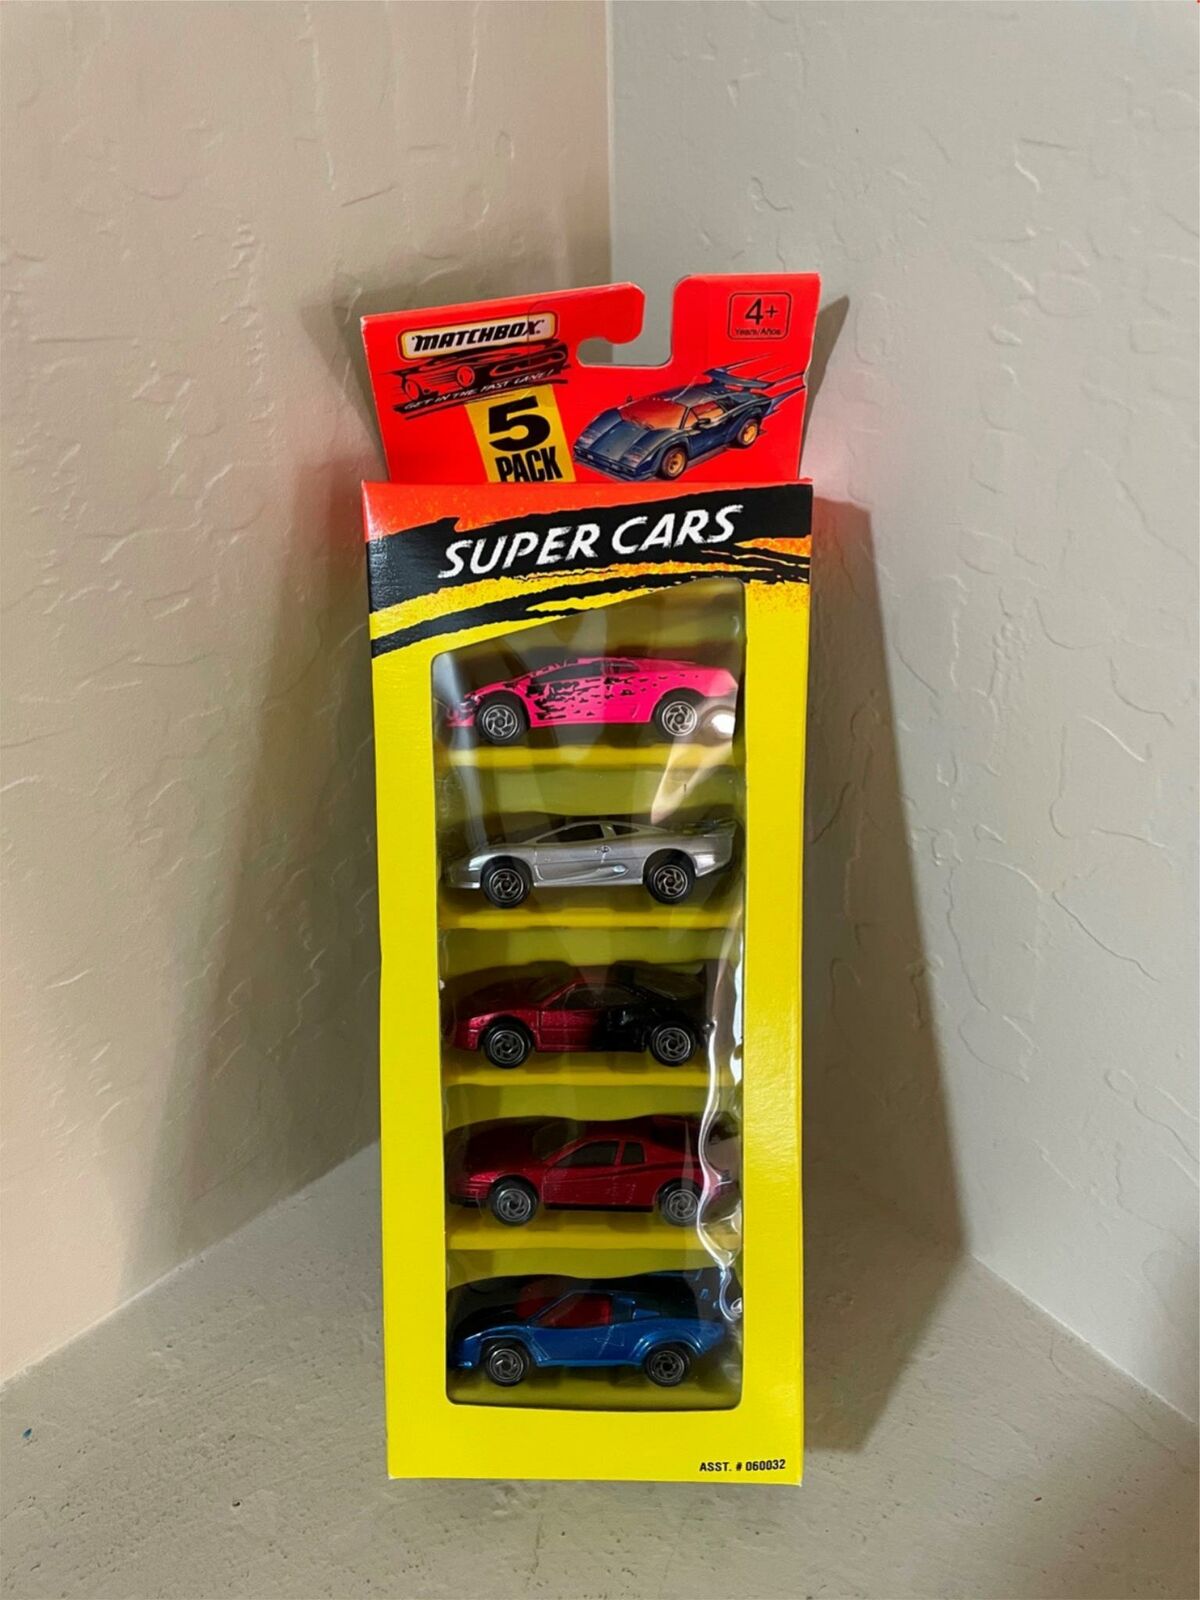 Matchbox Supper Cars 5 x Pack Gift Set New in Box Z13